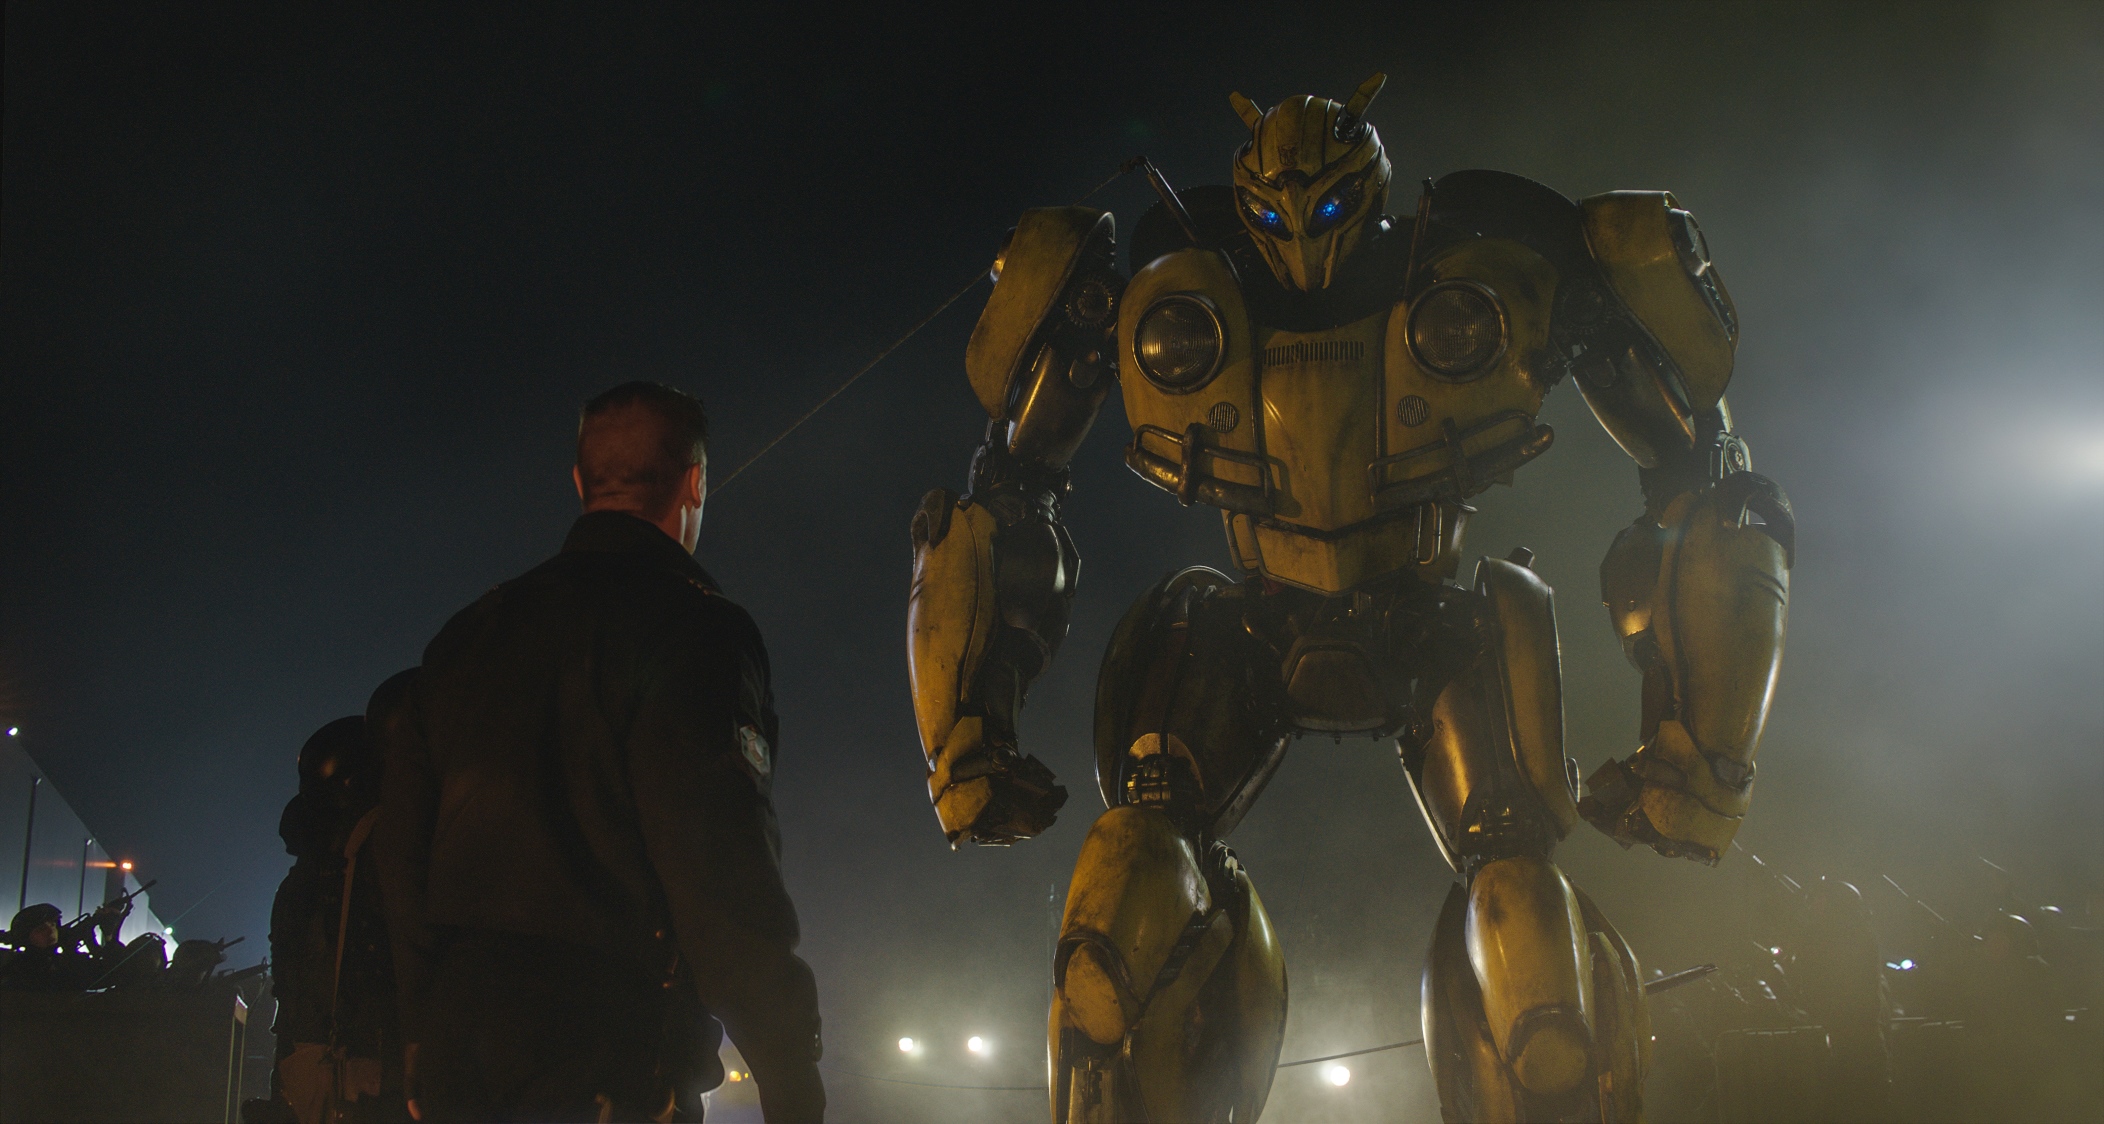 Left to right: John Cena as Agent Burns and Bumblebee in BUMBLEBEE from Paramount Pictures.